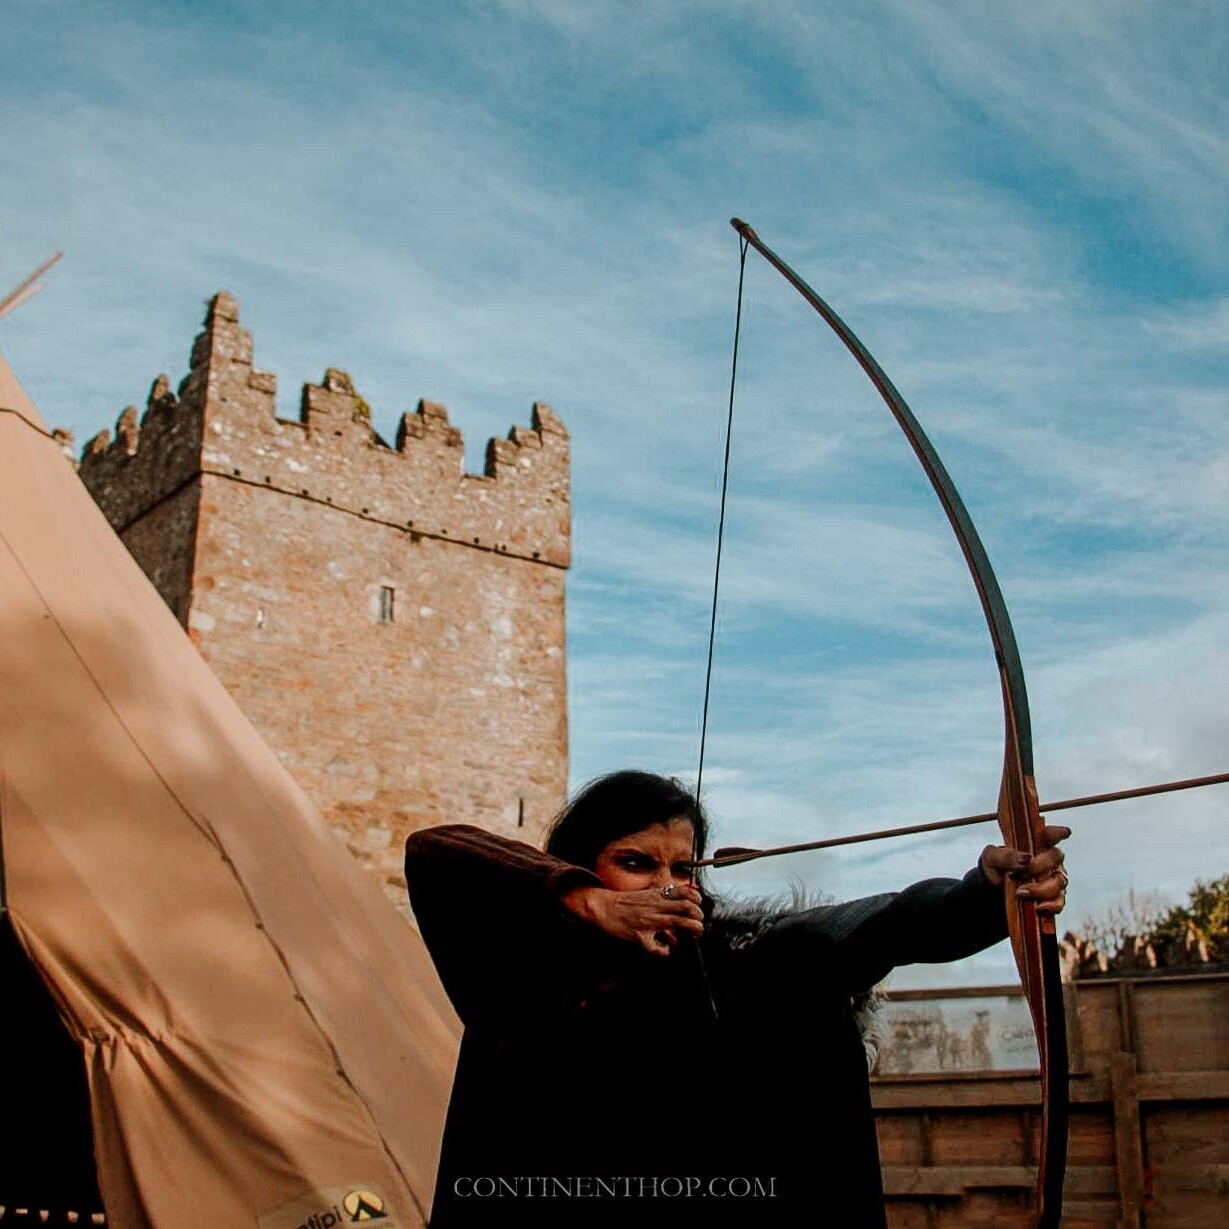 Woman shooting an arrow in front of tepee on a GOT locations in Northern Ireland visit